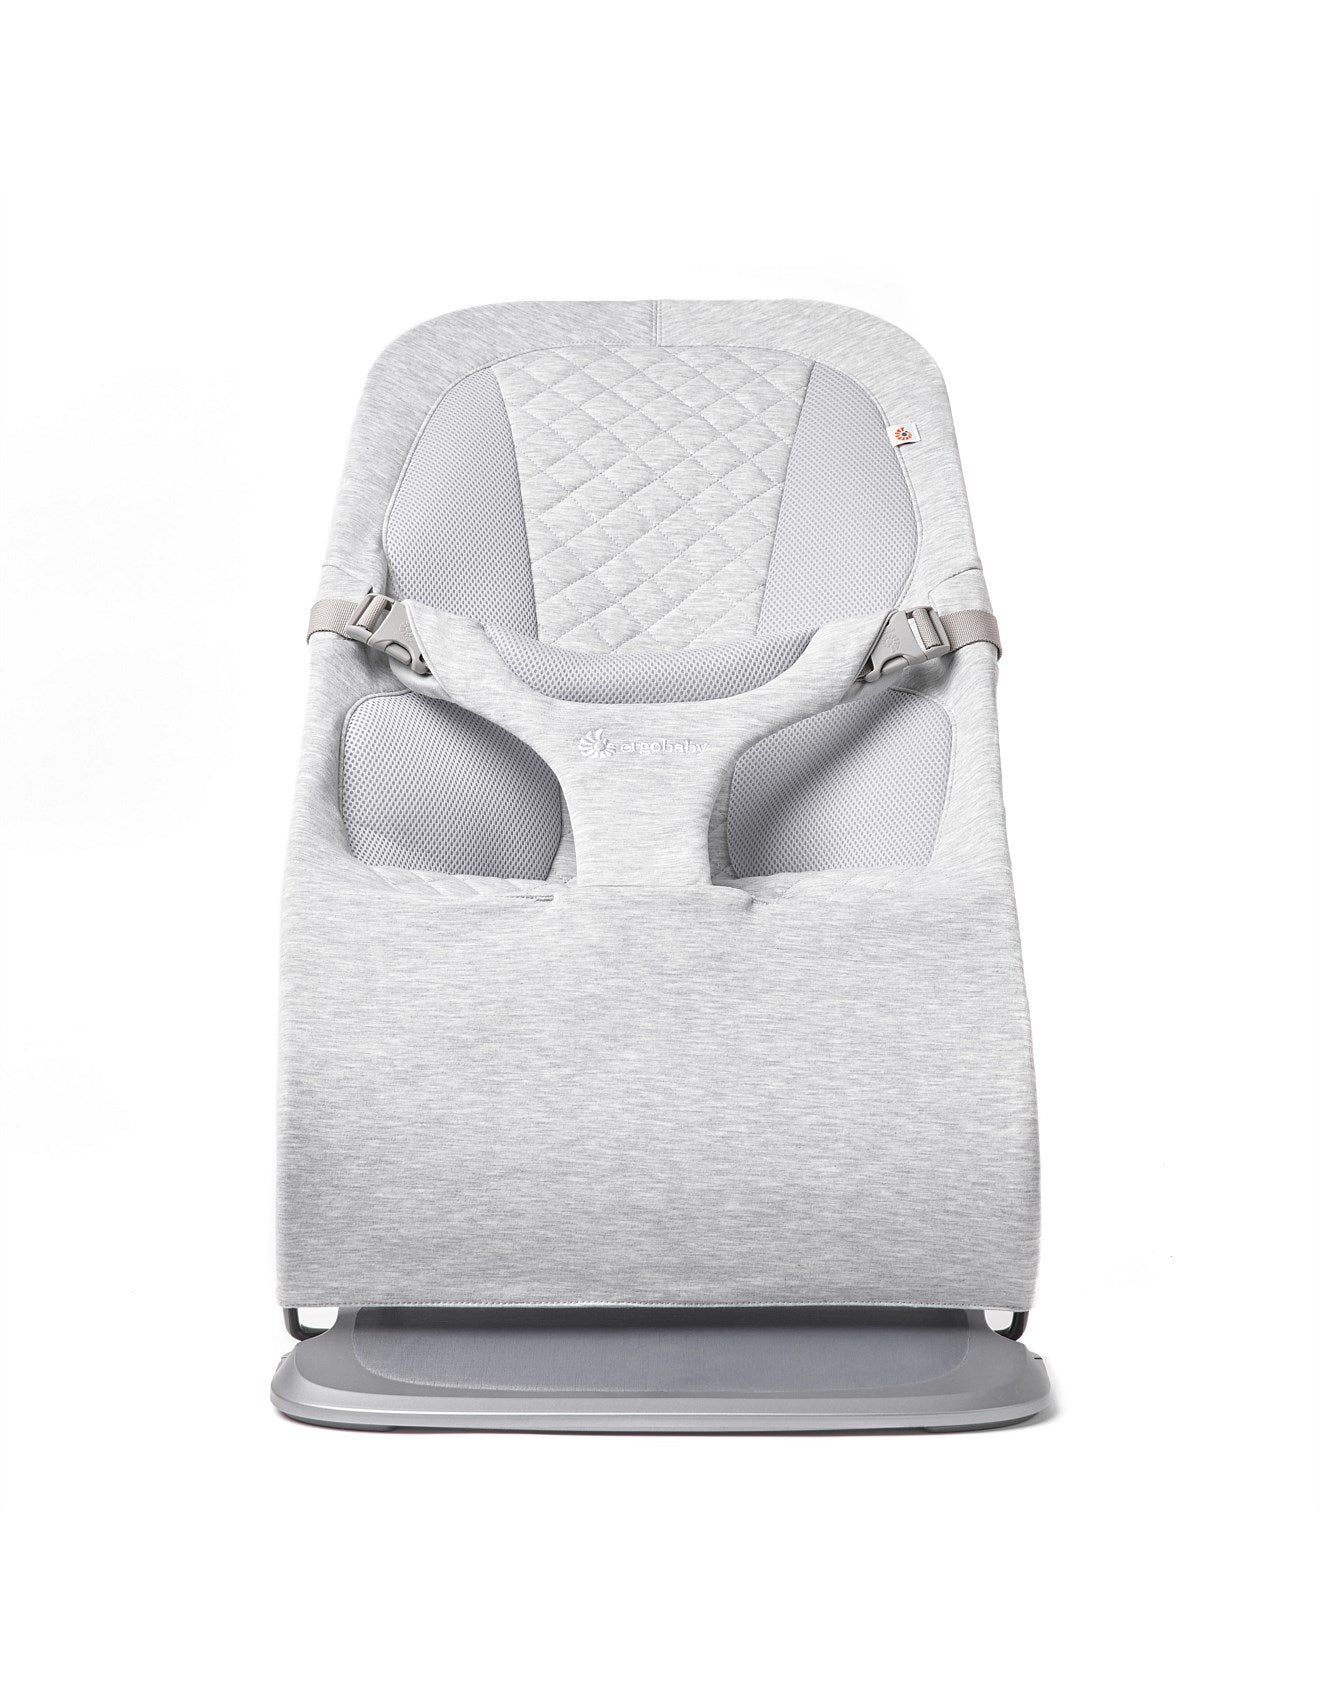 Ergobaby Evolve 3 in 1 Bouncer-LIGHT GREY - Tiny Tots Baby Store 